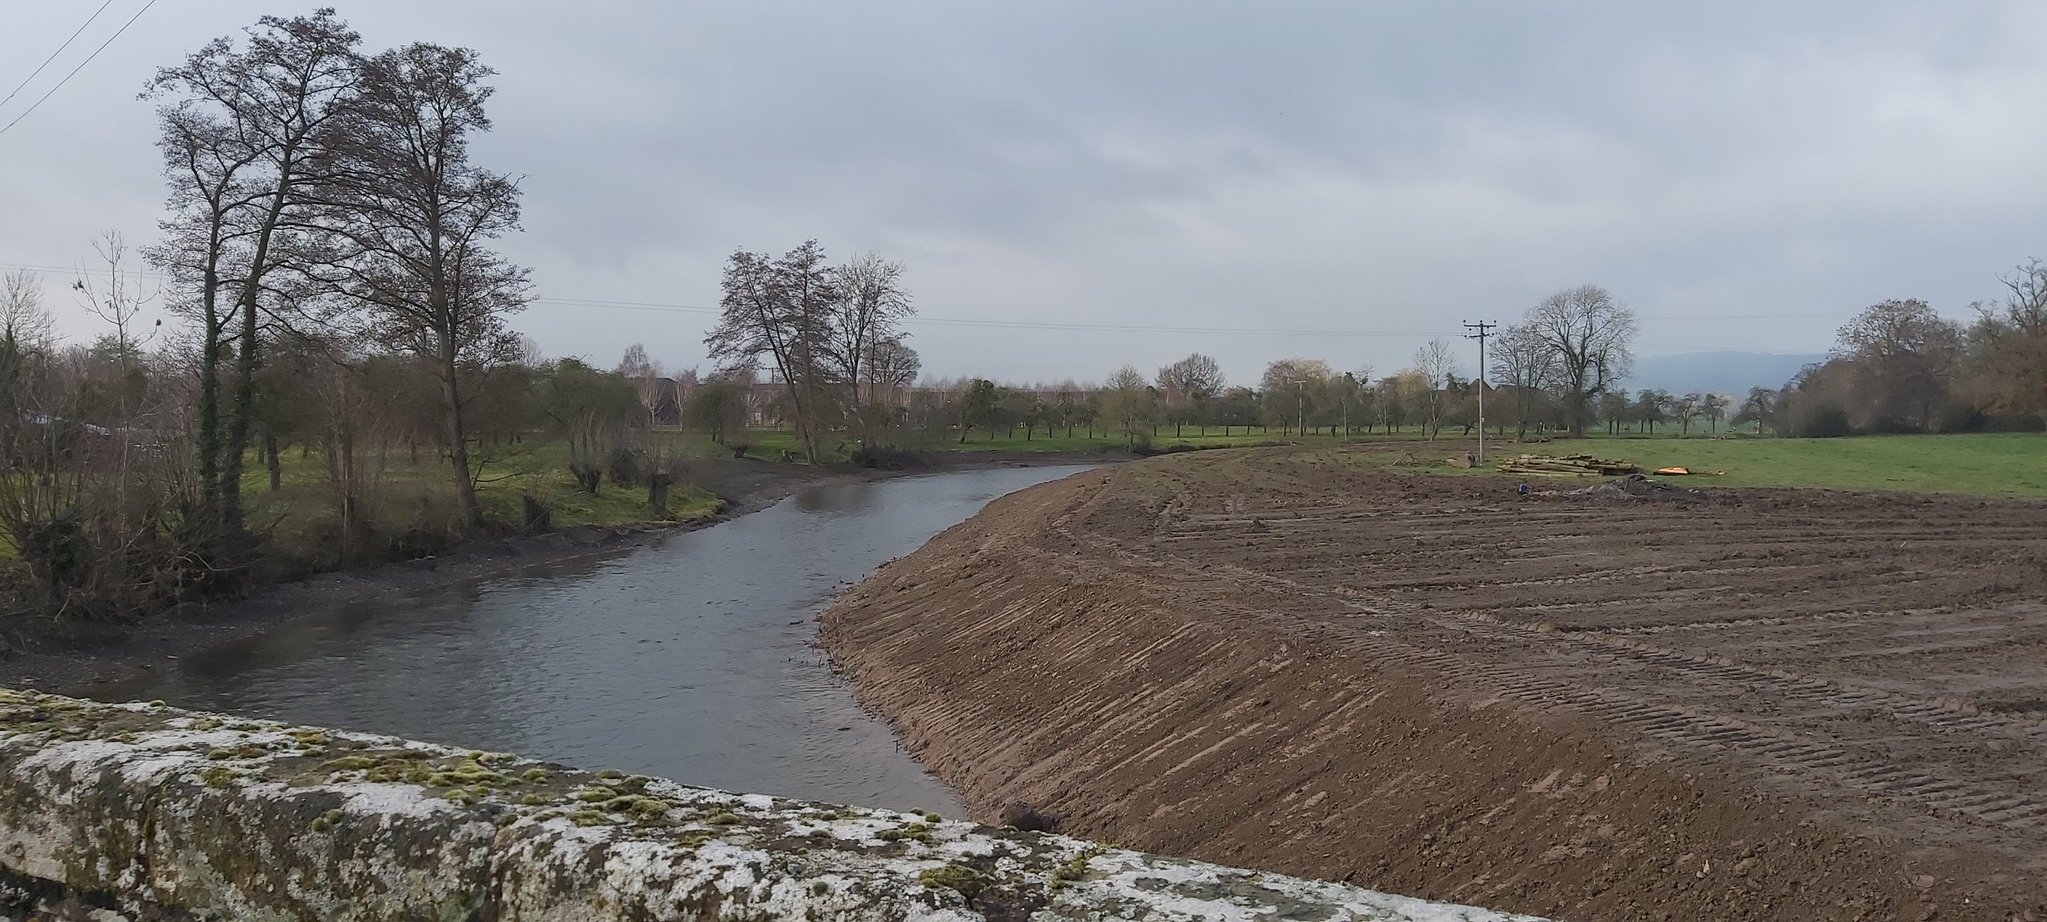 NEWS | Reports that farmer bulldozed land next to River Lugg to protect homes from flooding